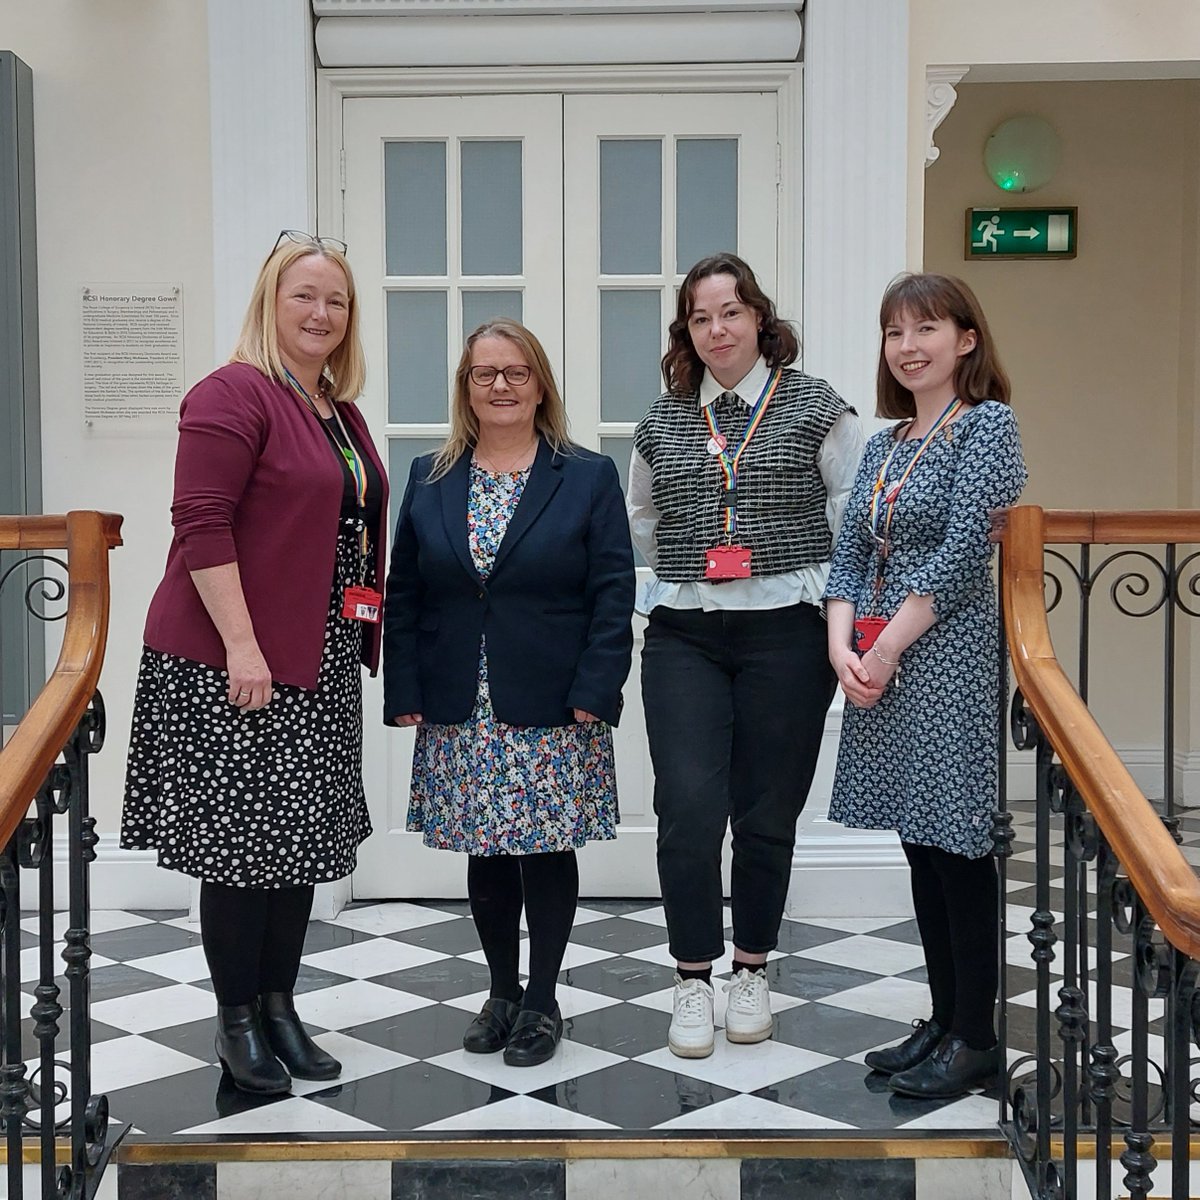 It was an honour to have Dr Mary Doherty @AutisticDoctor at RCSI discussing Autistic SPACE Framework + Autistic Doctors International. Photo w/ Collette Power (co-chair VisABILITY Forum) who opened the event, organisers @zoeenya22 + Jenny (RCSI EDI Unit). Thanks to all attendees!